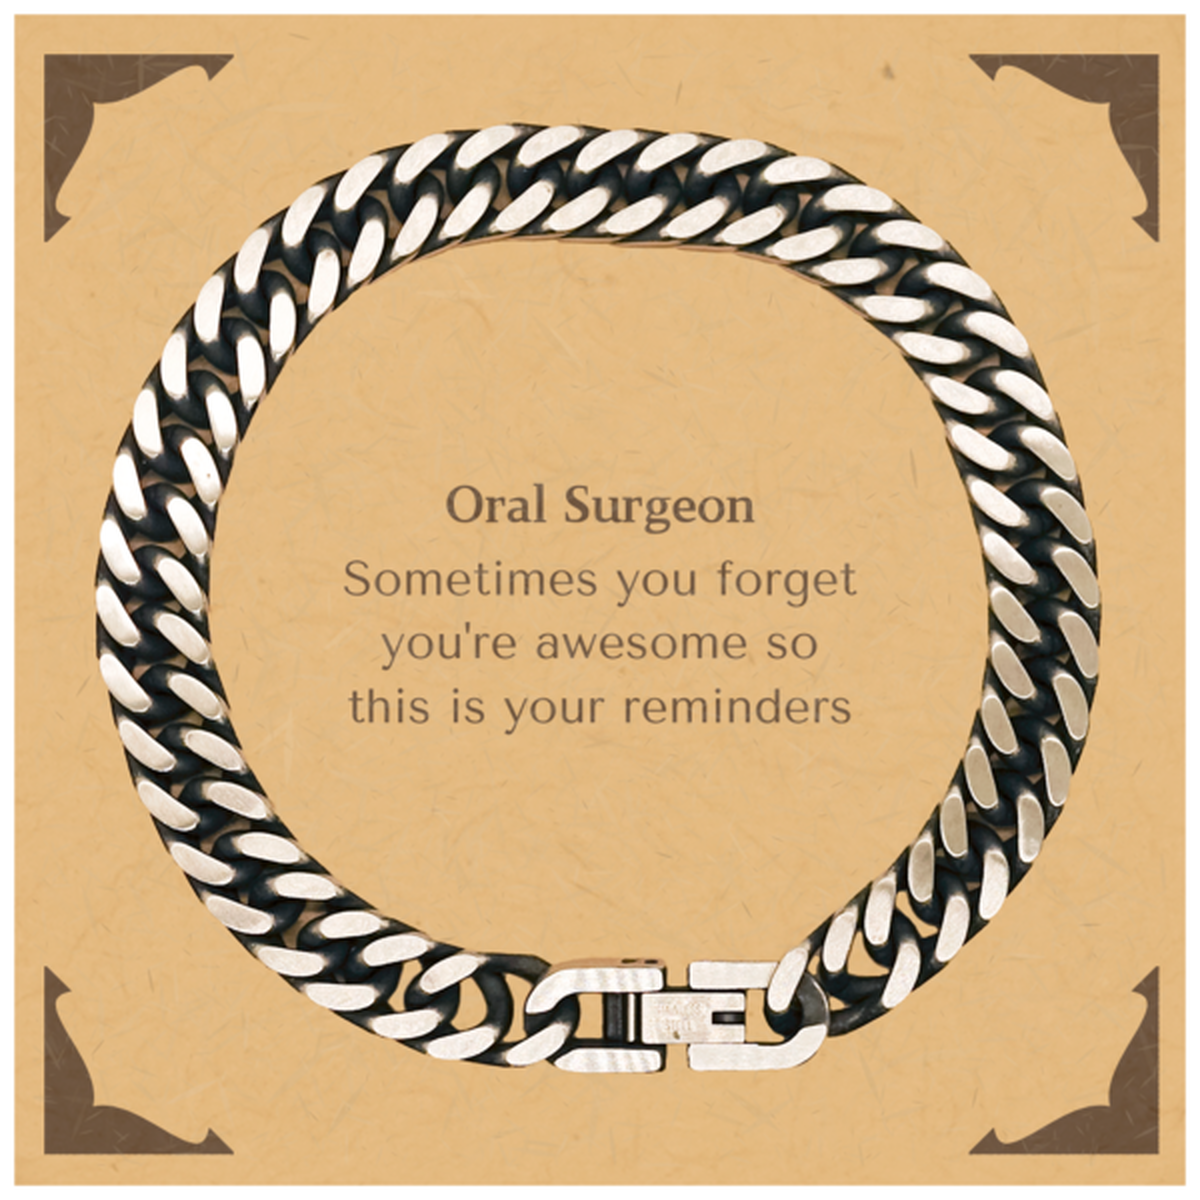 Sentimental Oral Surgeon Cuban Link Chain Bracelet, Oral Surgeon Sometimes you forget you're awesome so this is your reminders, Graduation Christmas Birthday Gifts for Oral Surgeon, Men, Women, Coworkers